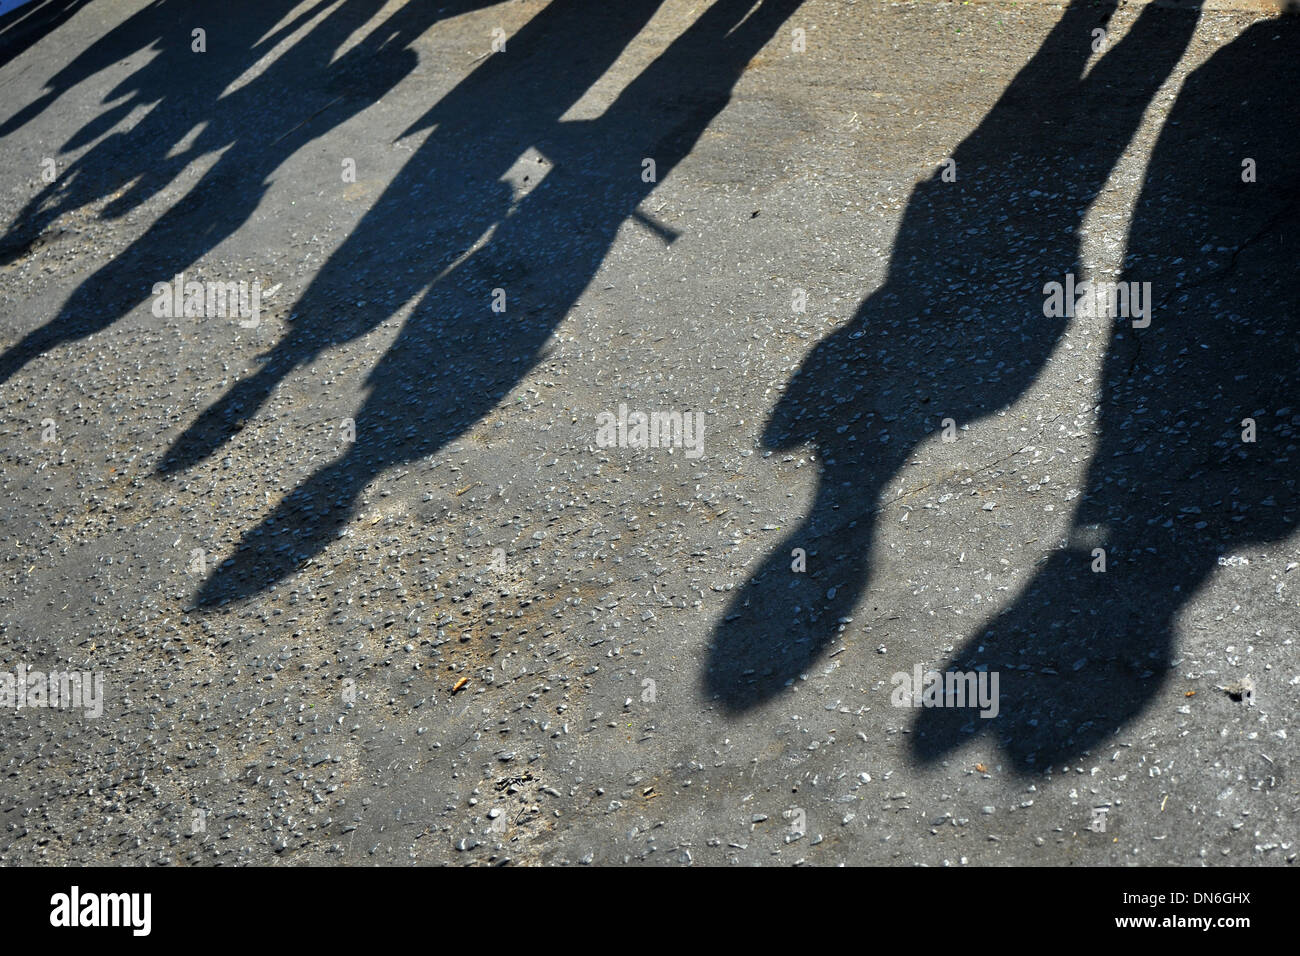 The shadows of protesters at a demonstration in Soweto, South Africa ...